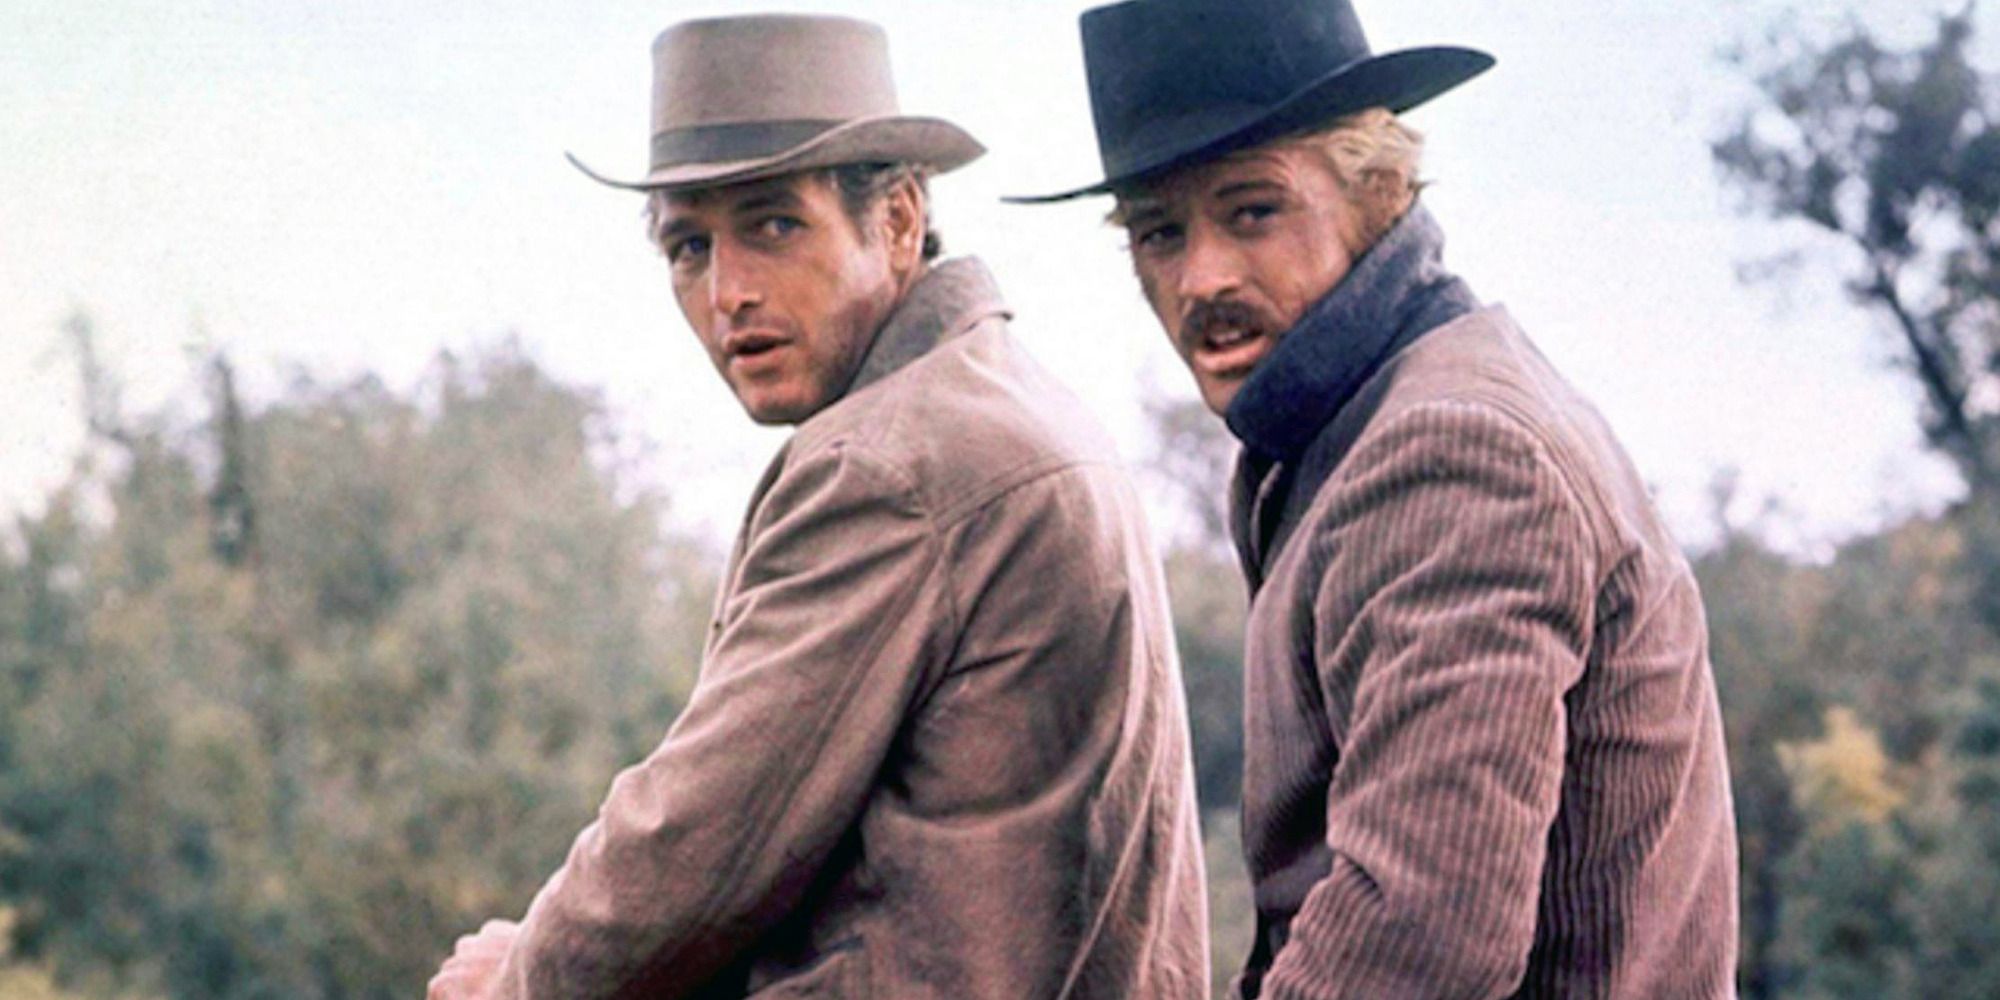 Paul Newman and Robert Redford on horseback in Butch Cassidy and the Sundance Kid